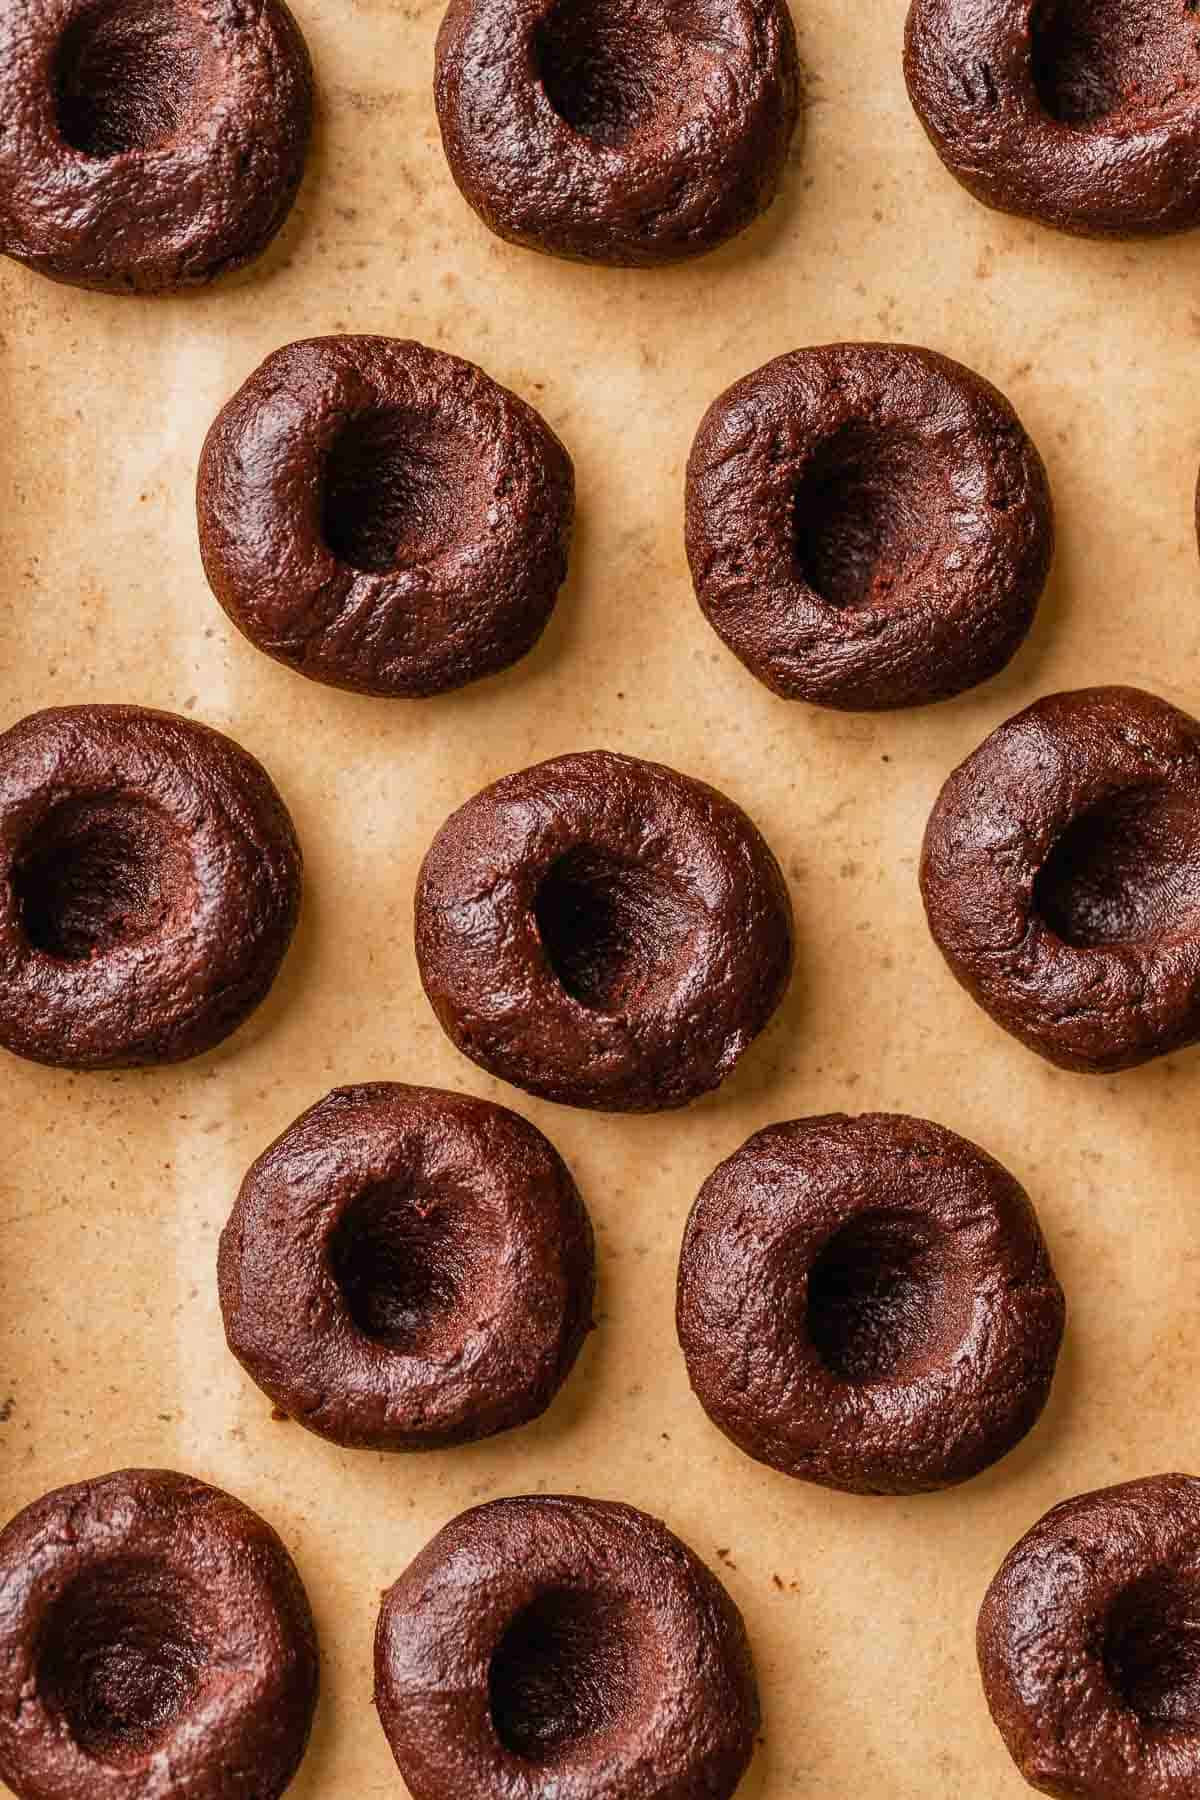 Chocolate cookie dough balls with indents in the centers on a baking tray.